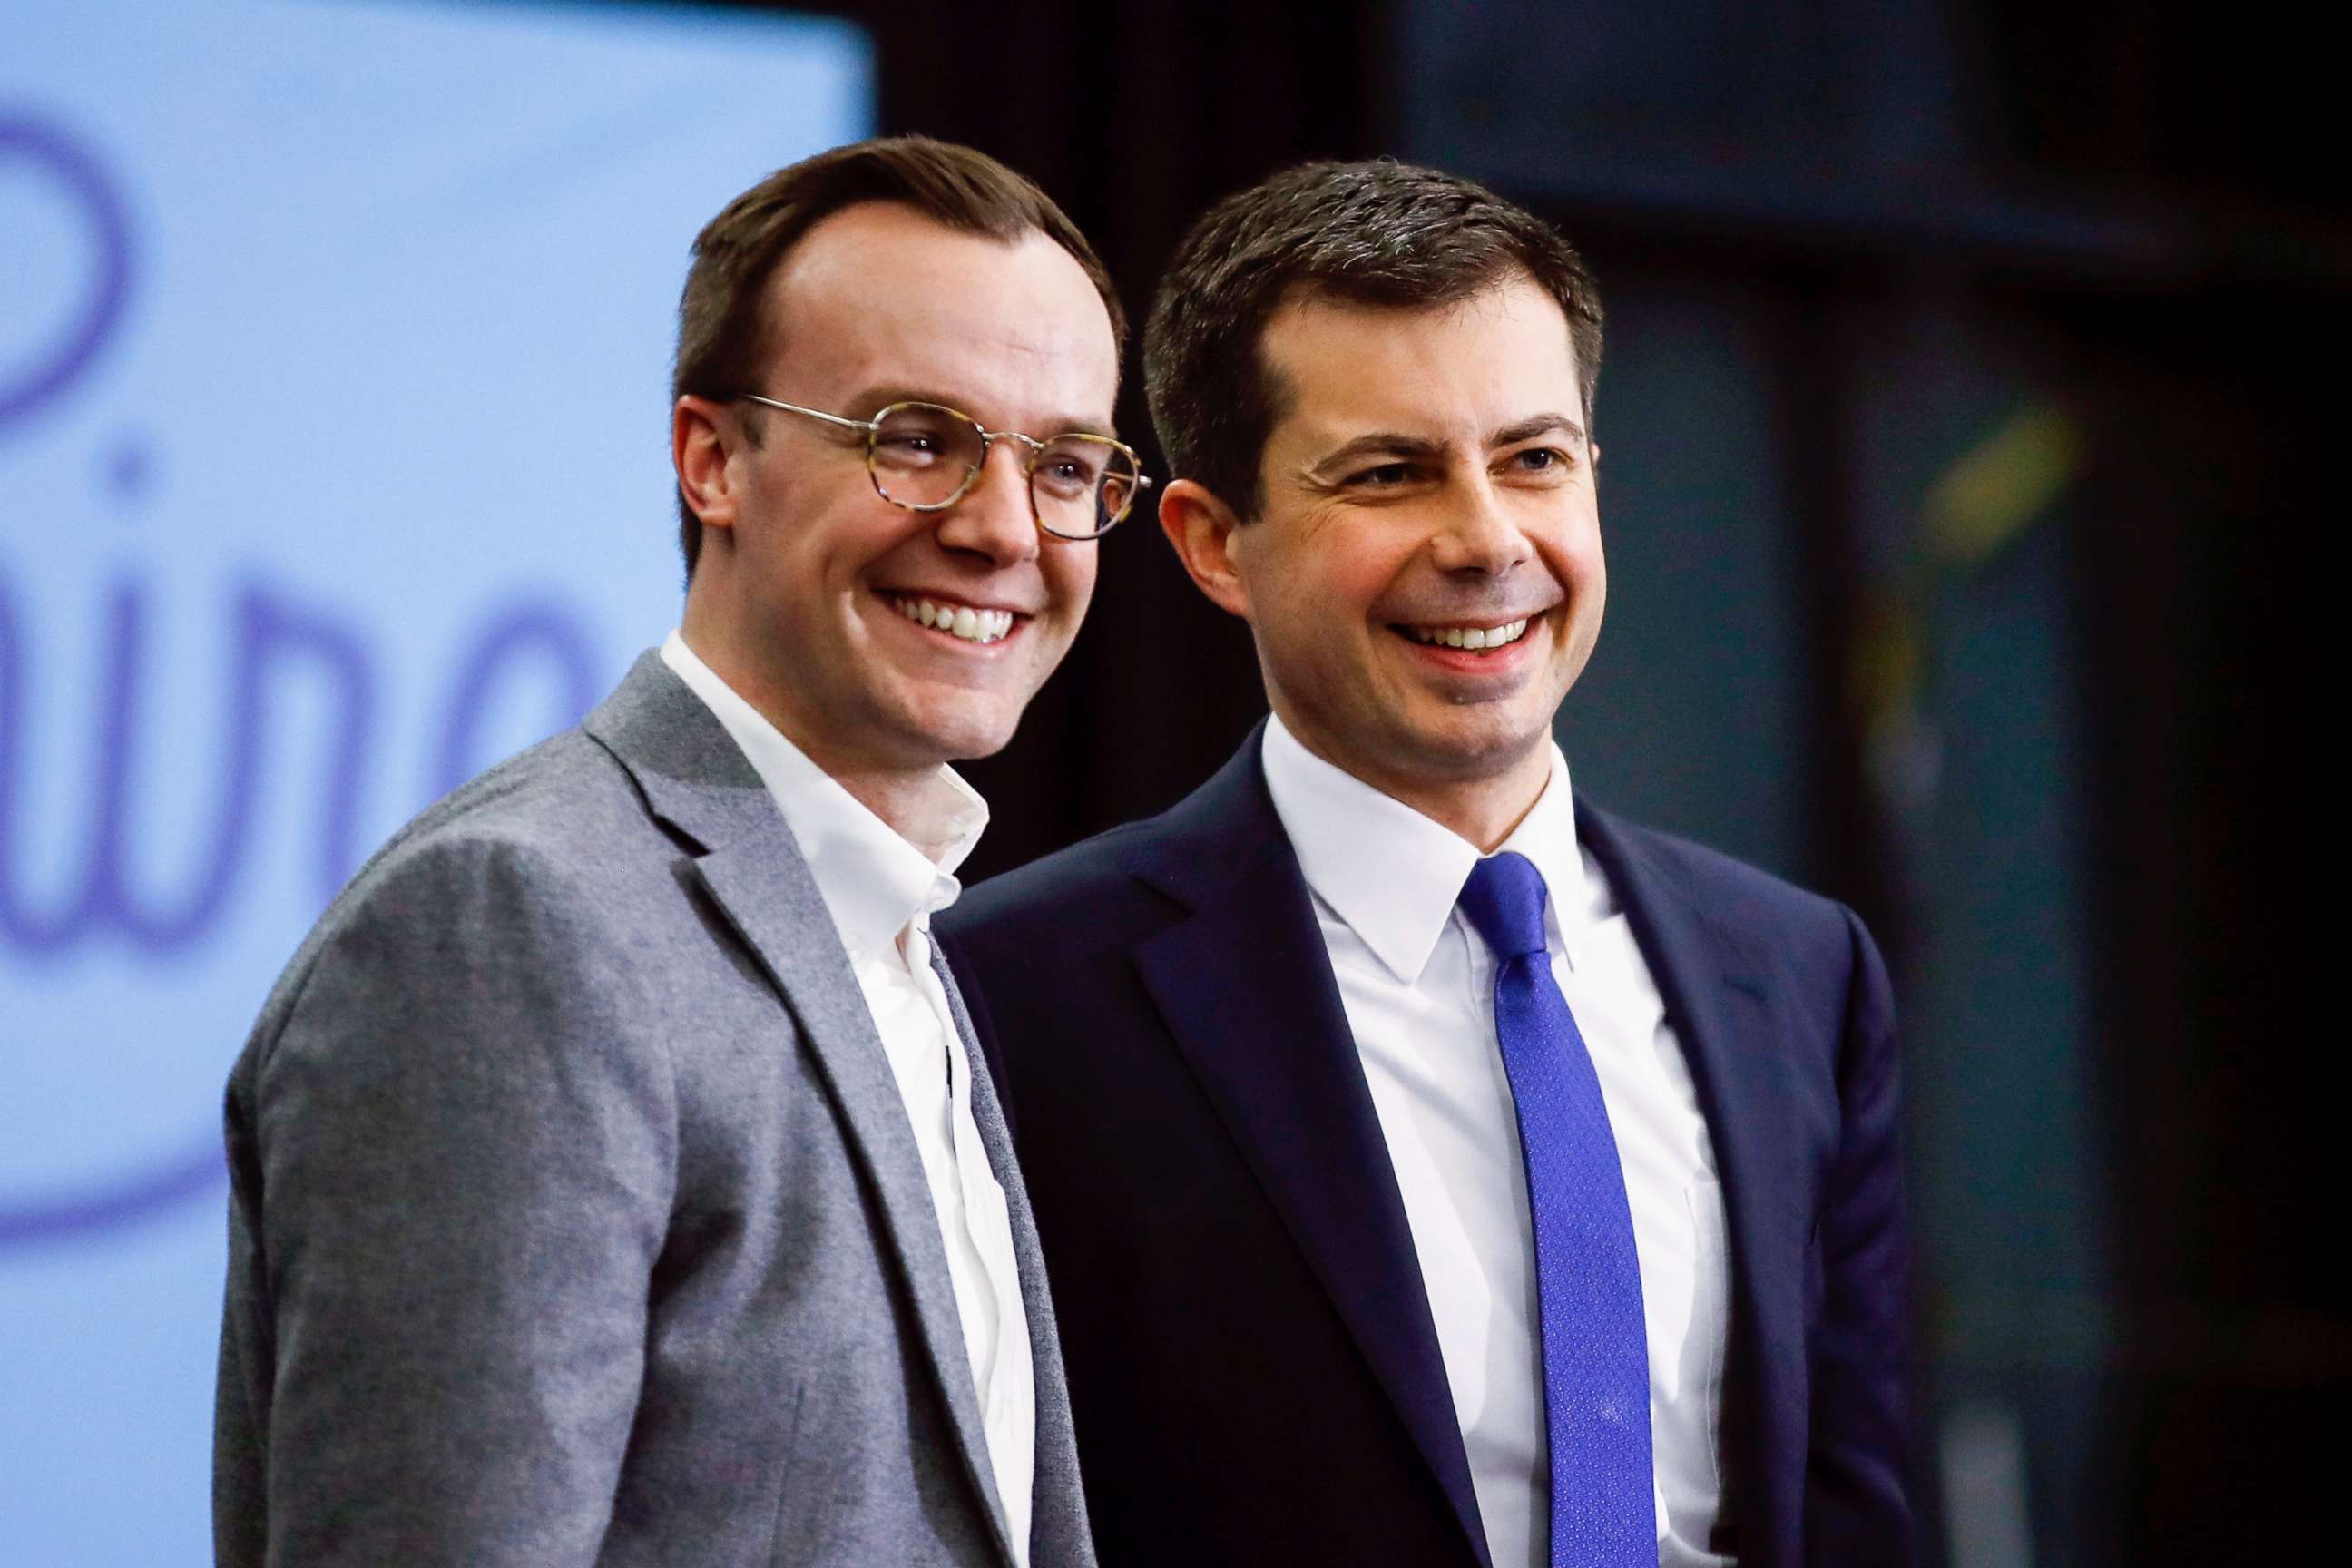 PHOTO: Former South Bend, Ind., Mayor Pete Buttigieg, right, and his husband Chasten Buttigieg acknowledge the audience at the end of a campaign event in Milford, N.H., Feb. 10, 2010.